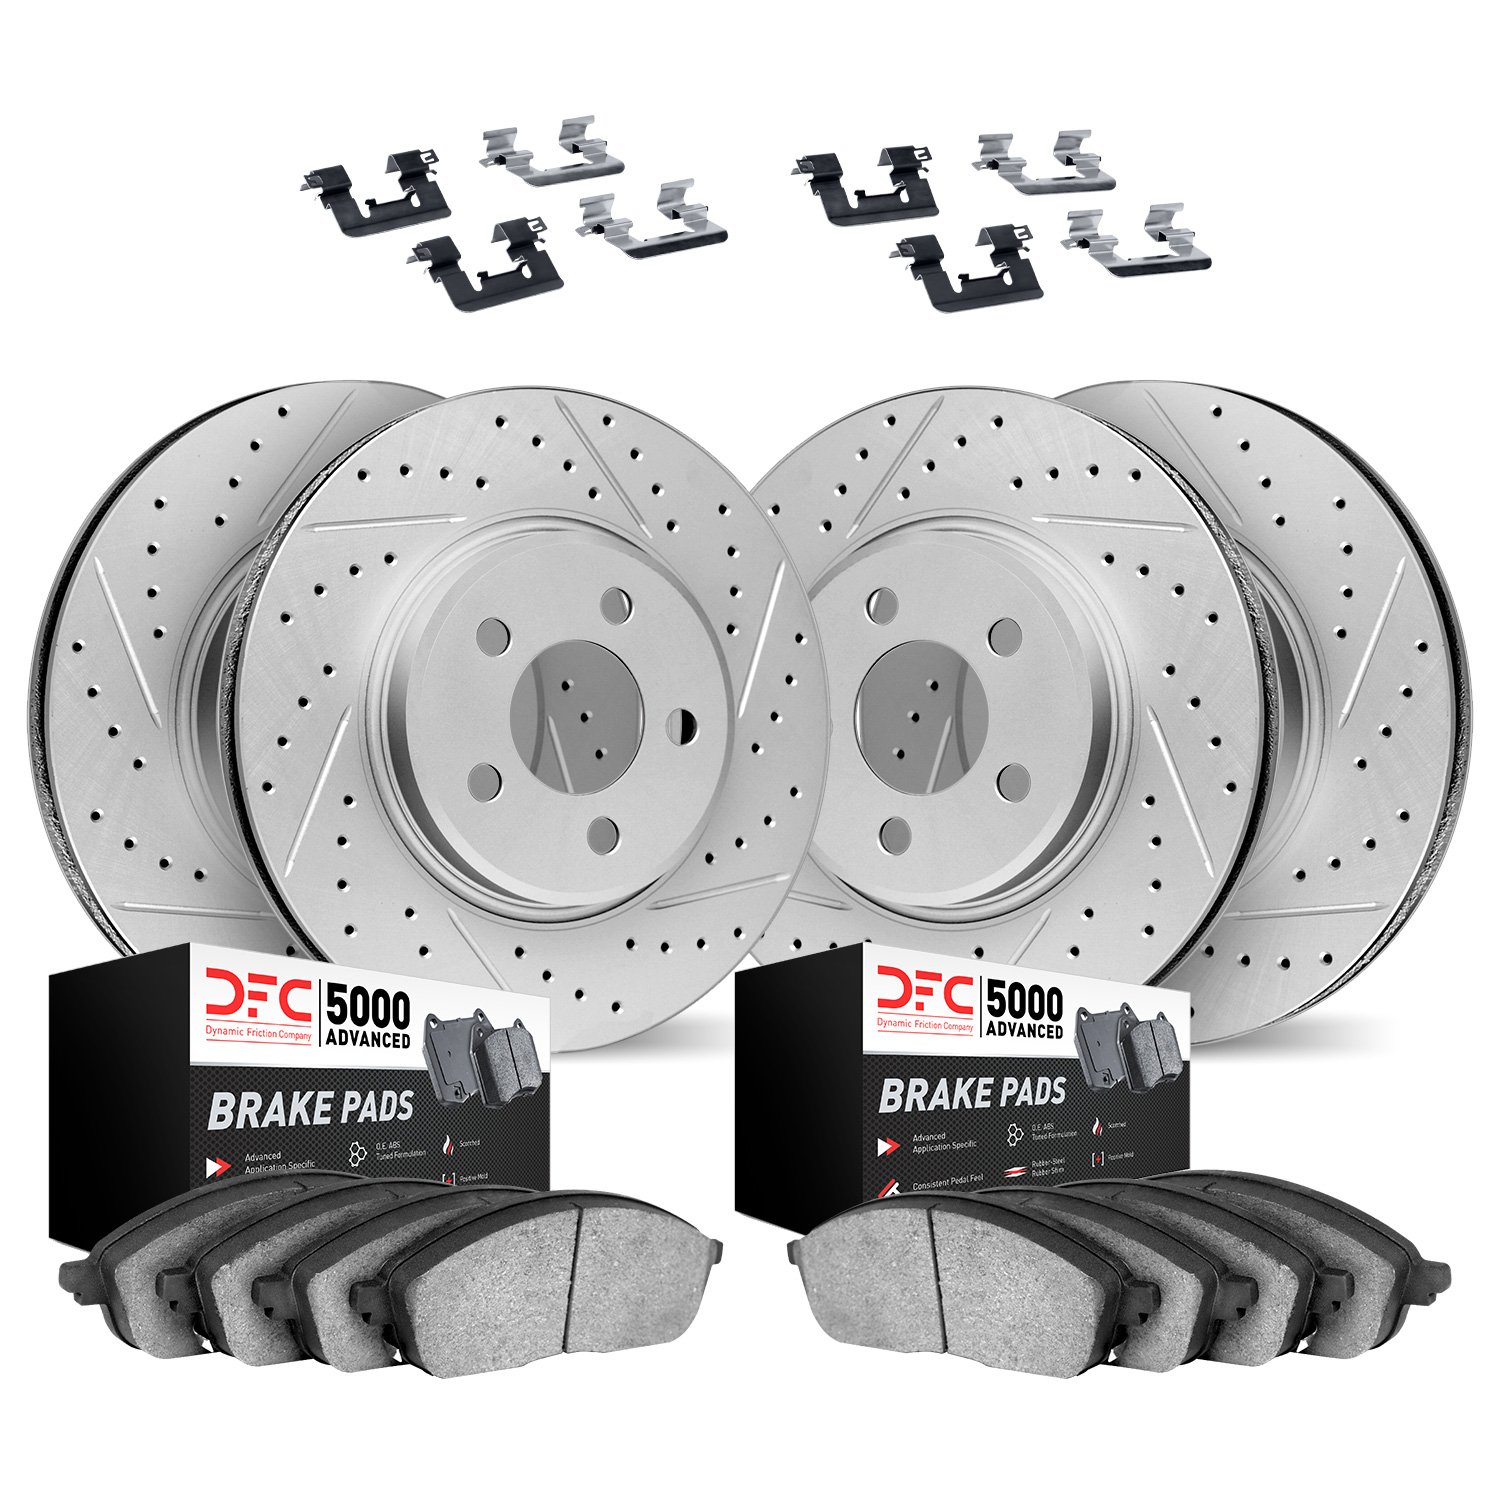 2514-31041 Geoperformance Drilled/Slotted Rotors w/5000 Advanced Brake Pads Kit & Hardware, 2004-2006 BMW, Position: Front and R